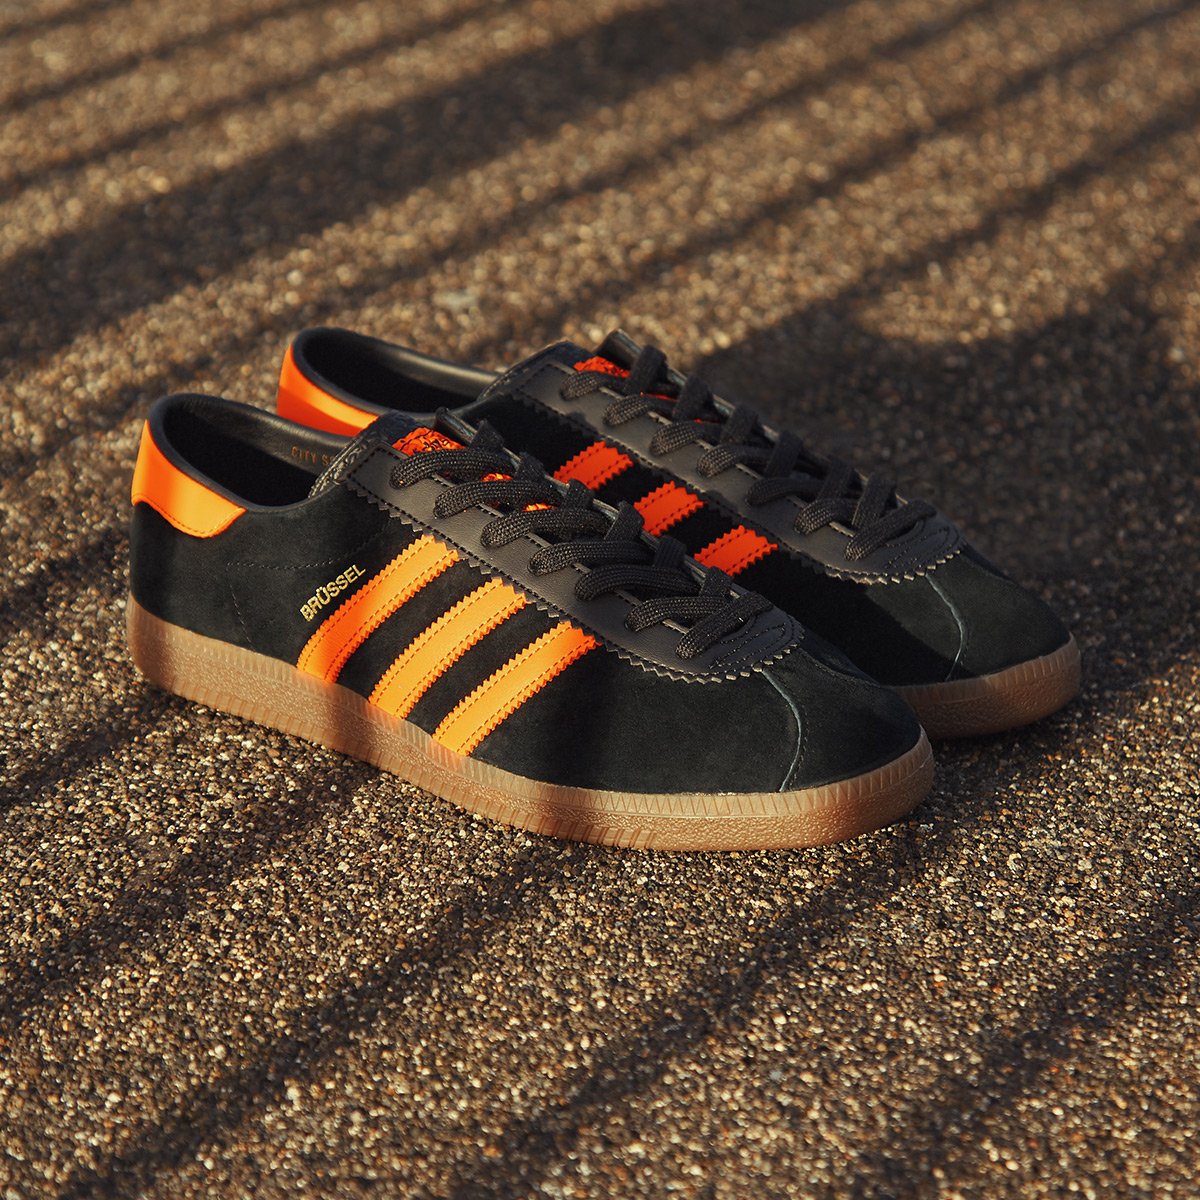 END. on Twitter: adidas Brussels is available in-store today (£89). https://t.co/X3XTEcFOCV https://t.co/oGwTgyFZRo" / Twitter